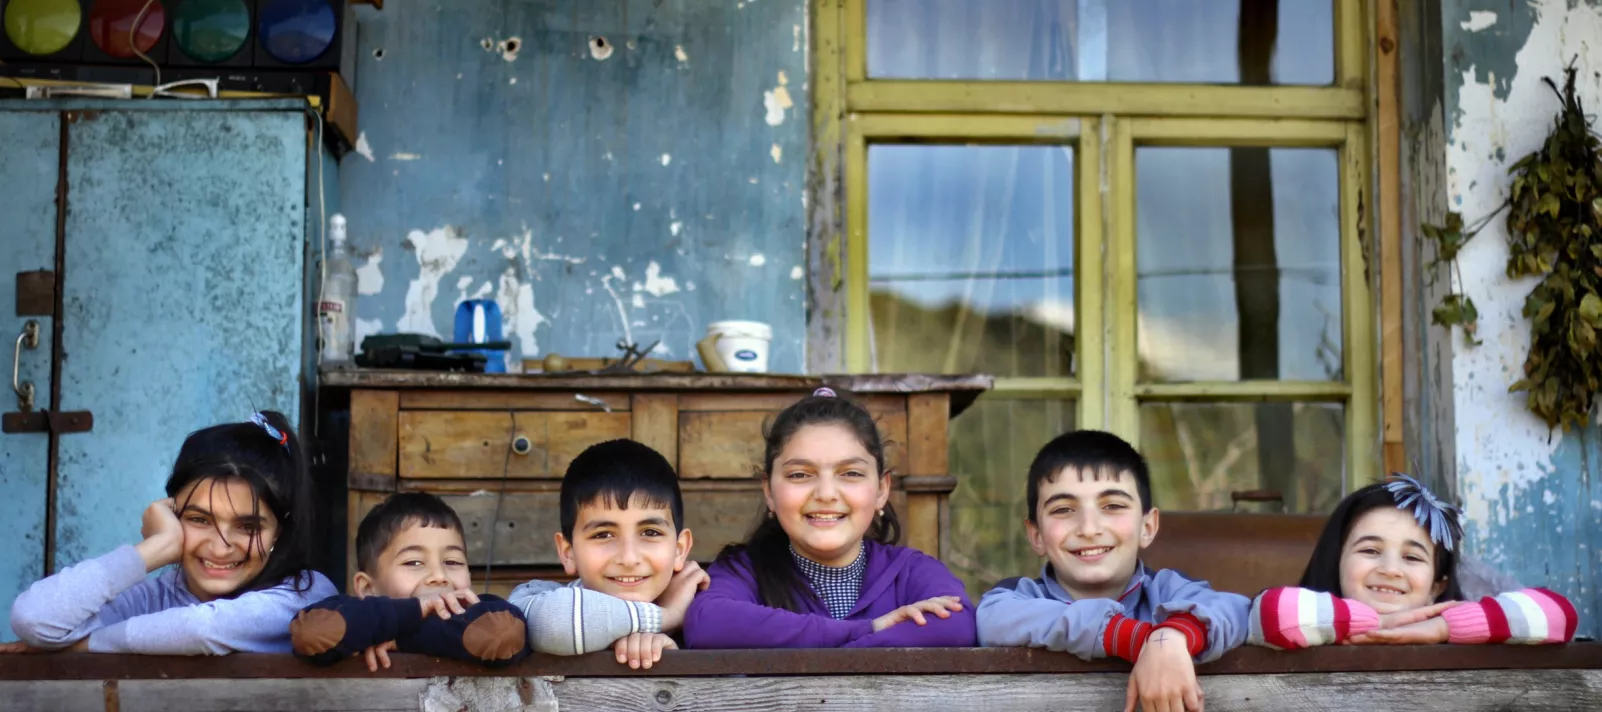 Six children standing behind the fences in front of the old building in the village and putting their arms on the fence and smiling.